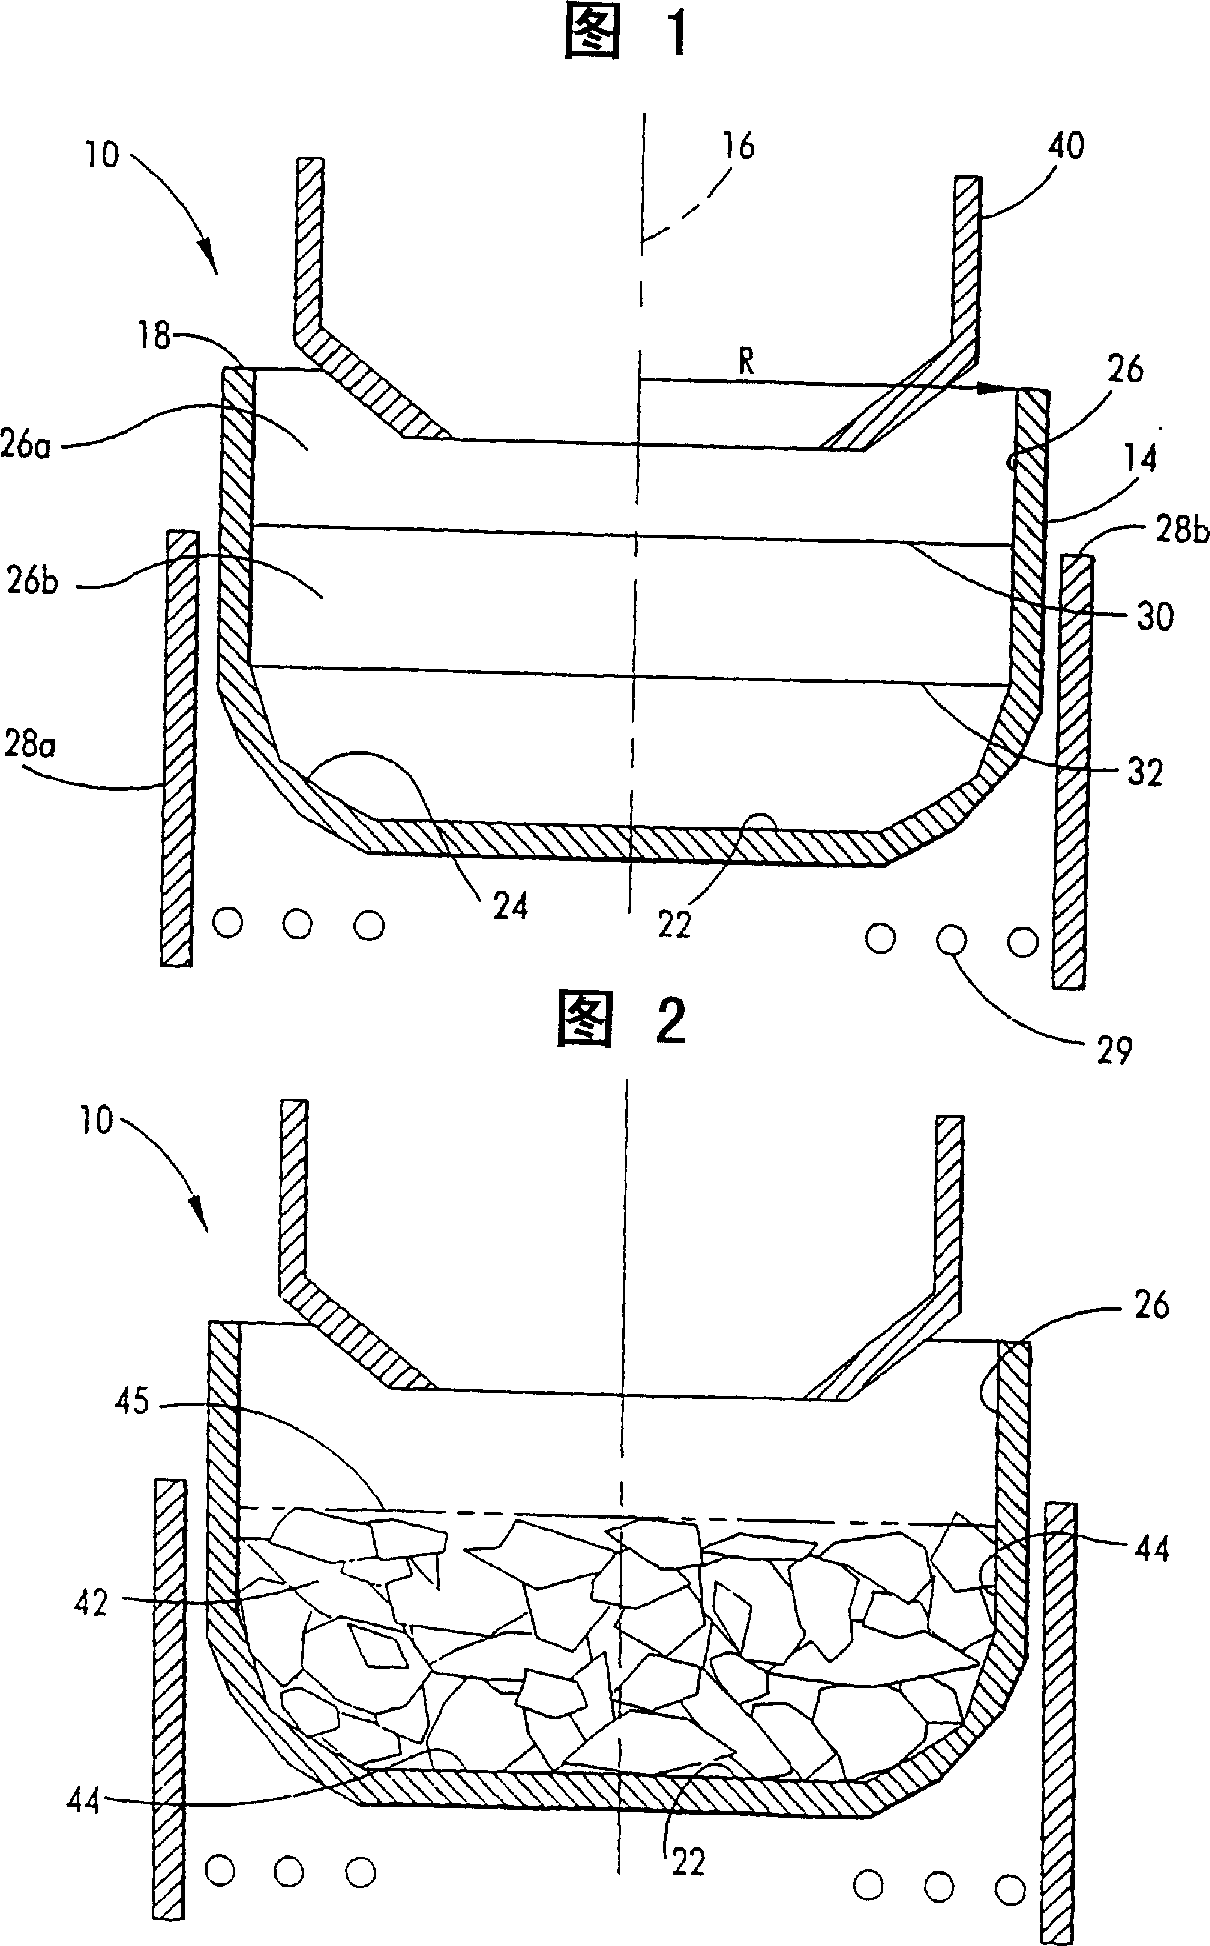 Process for preparing silicon melt from polysilicon charge